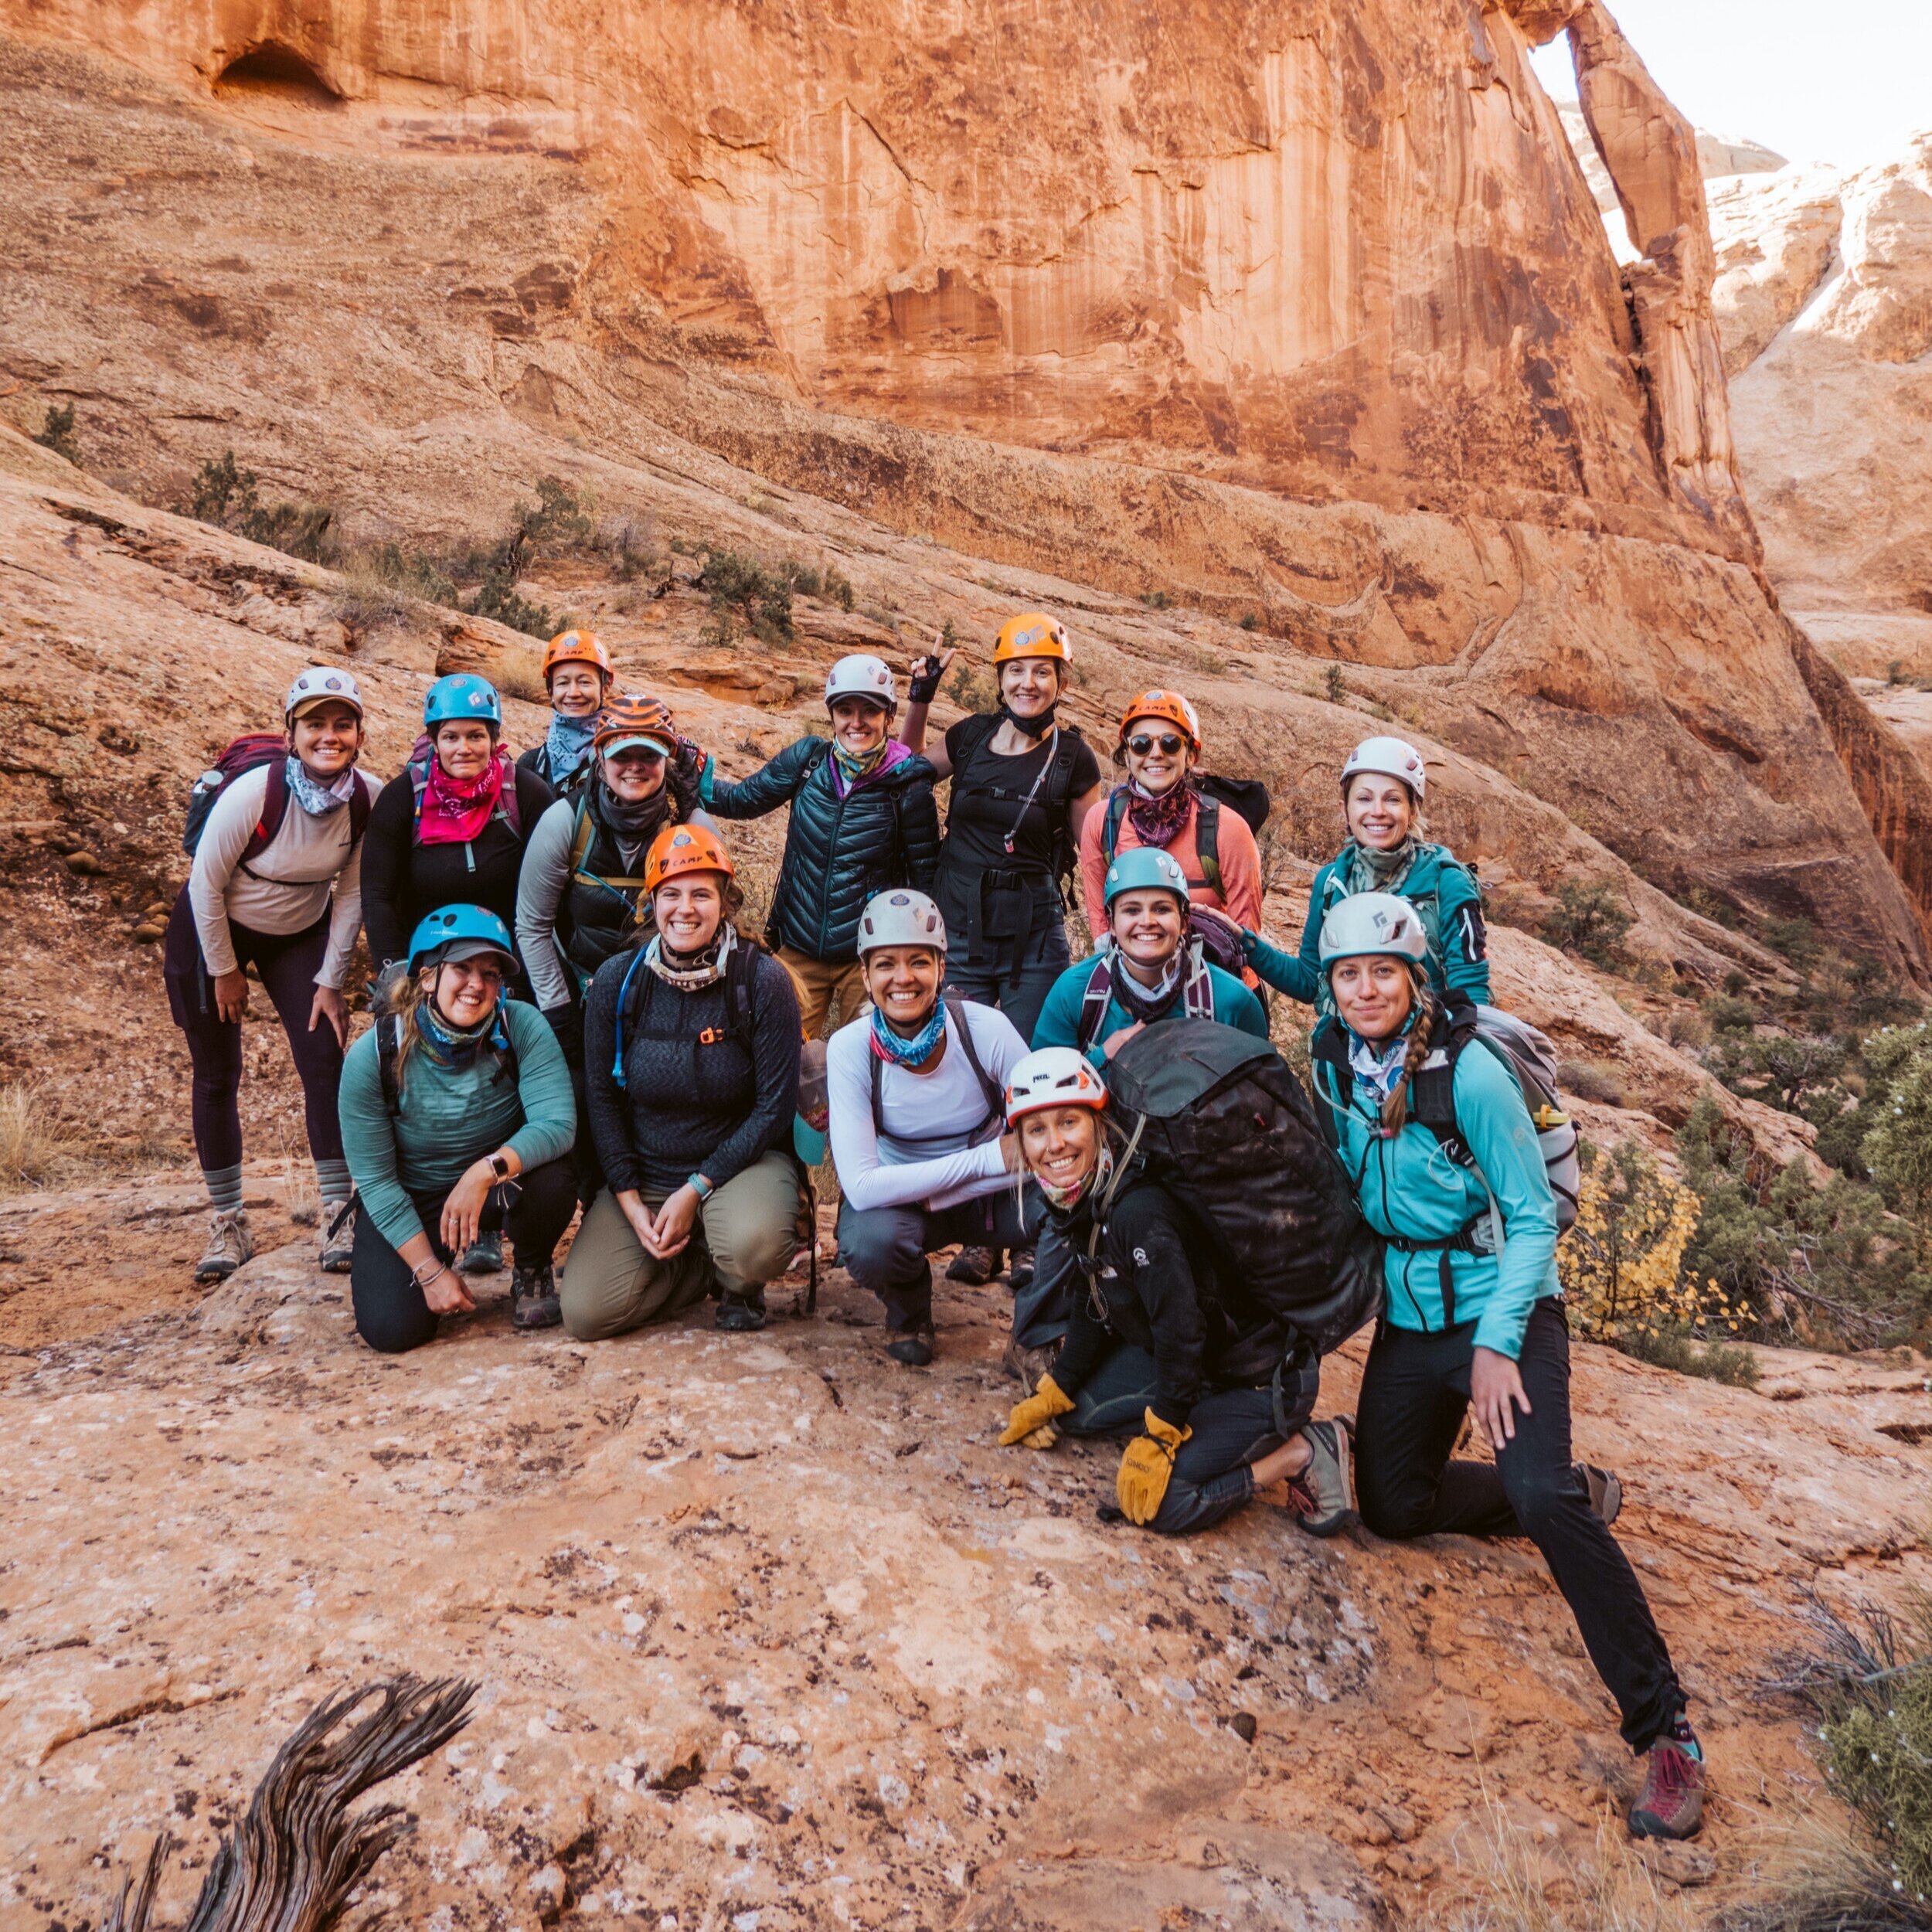 A group of women on a canyoneering adventure in Moab, UT